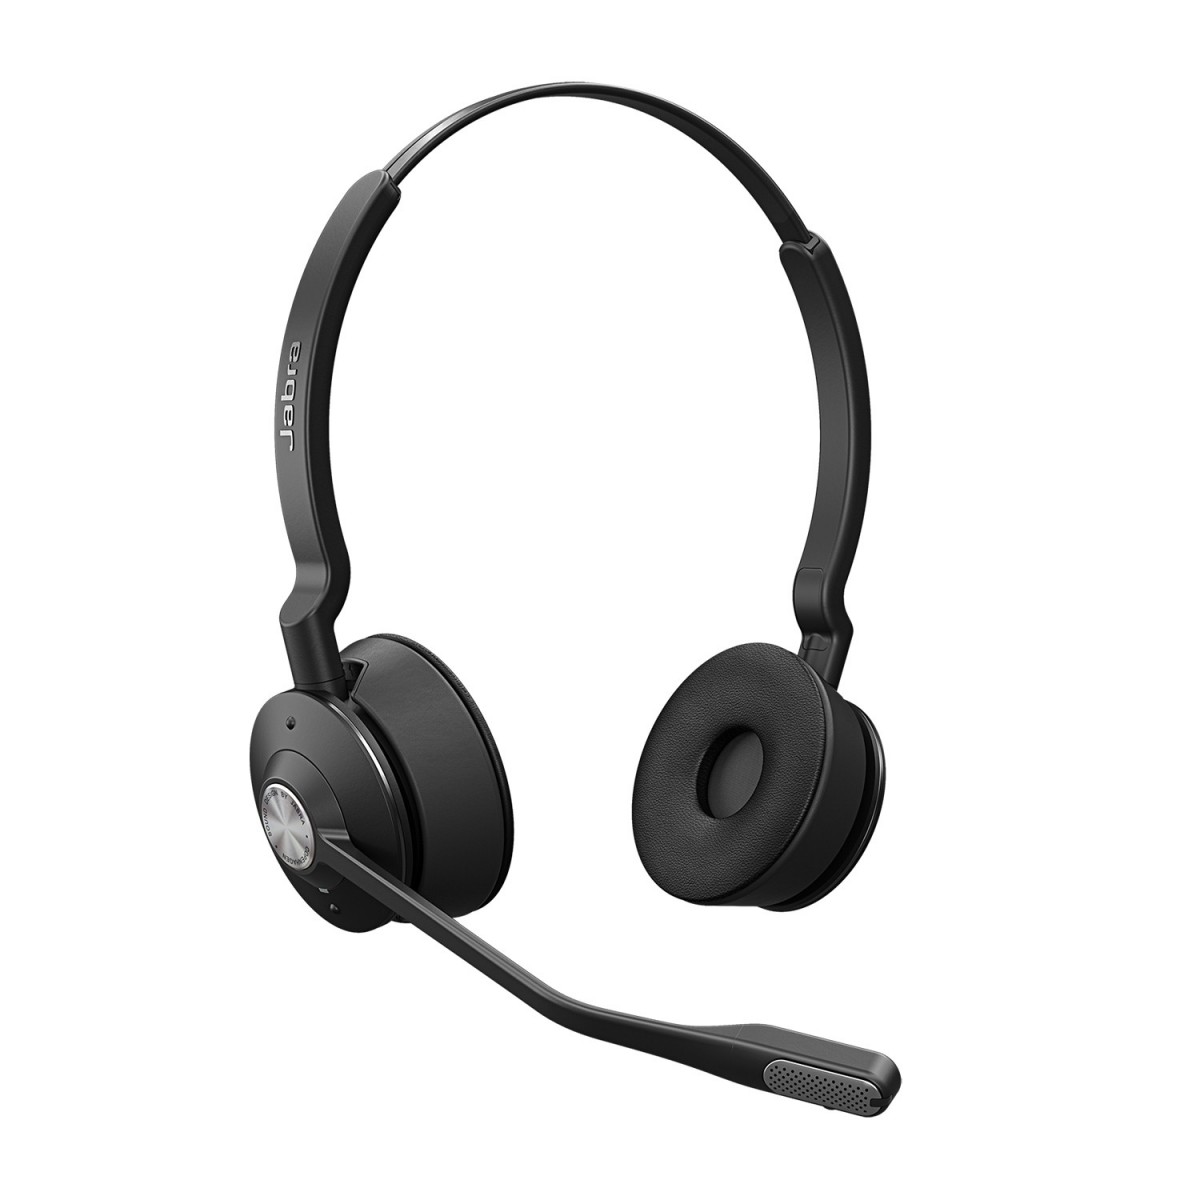 Jabra Engage replacement Stereo headset - Headset